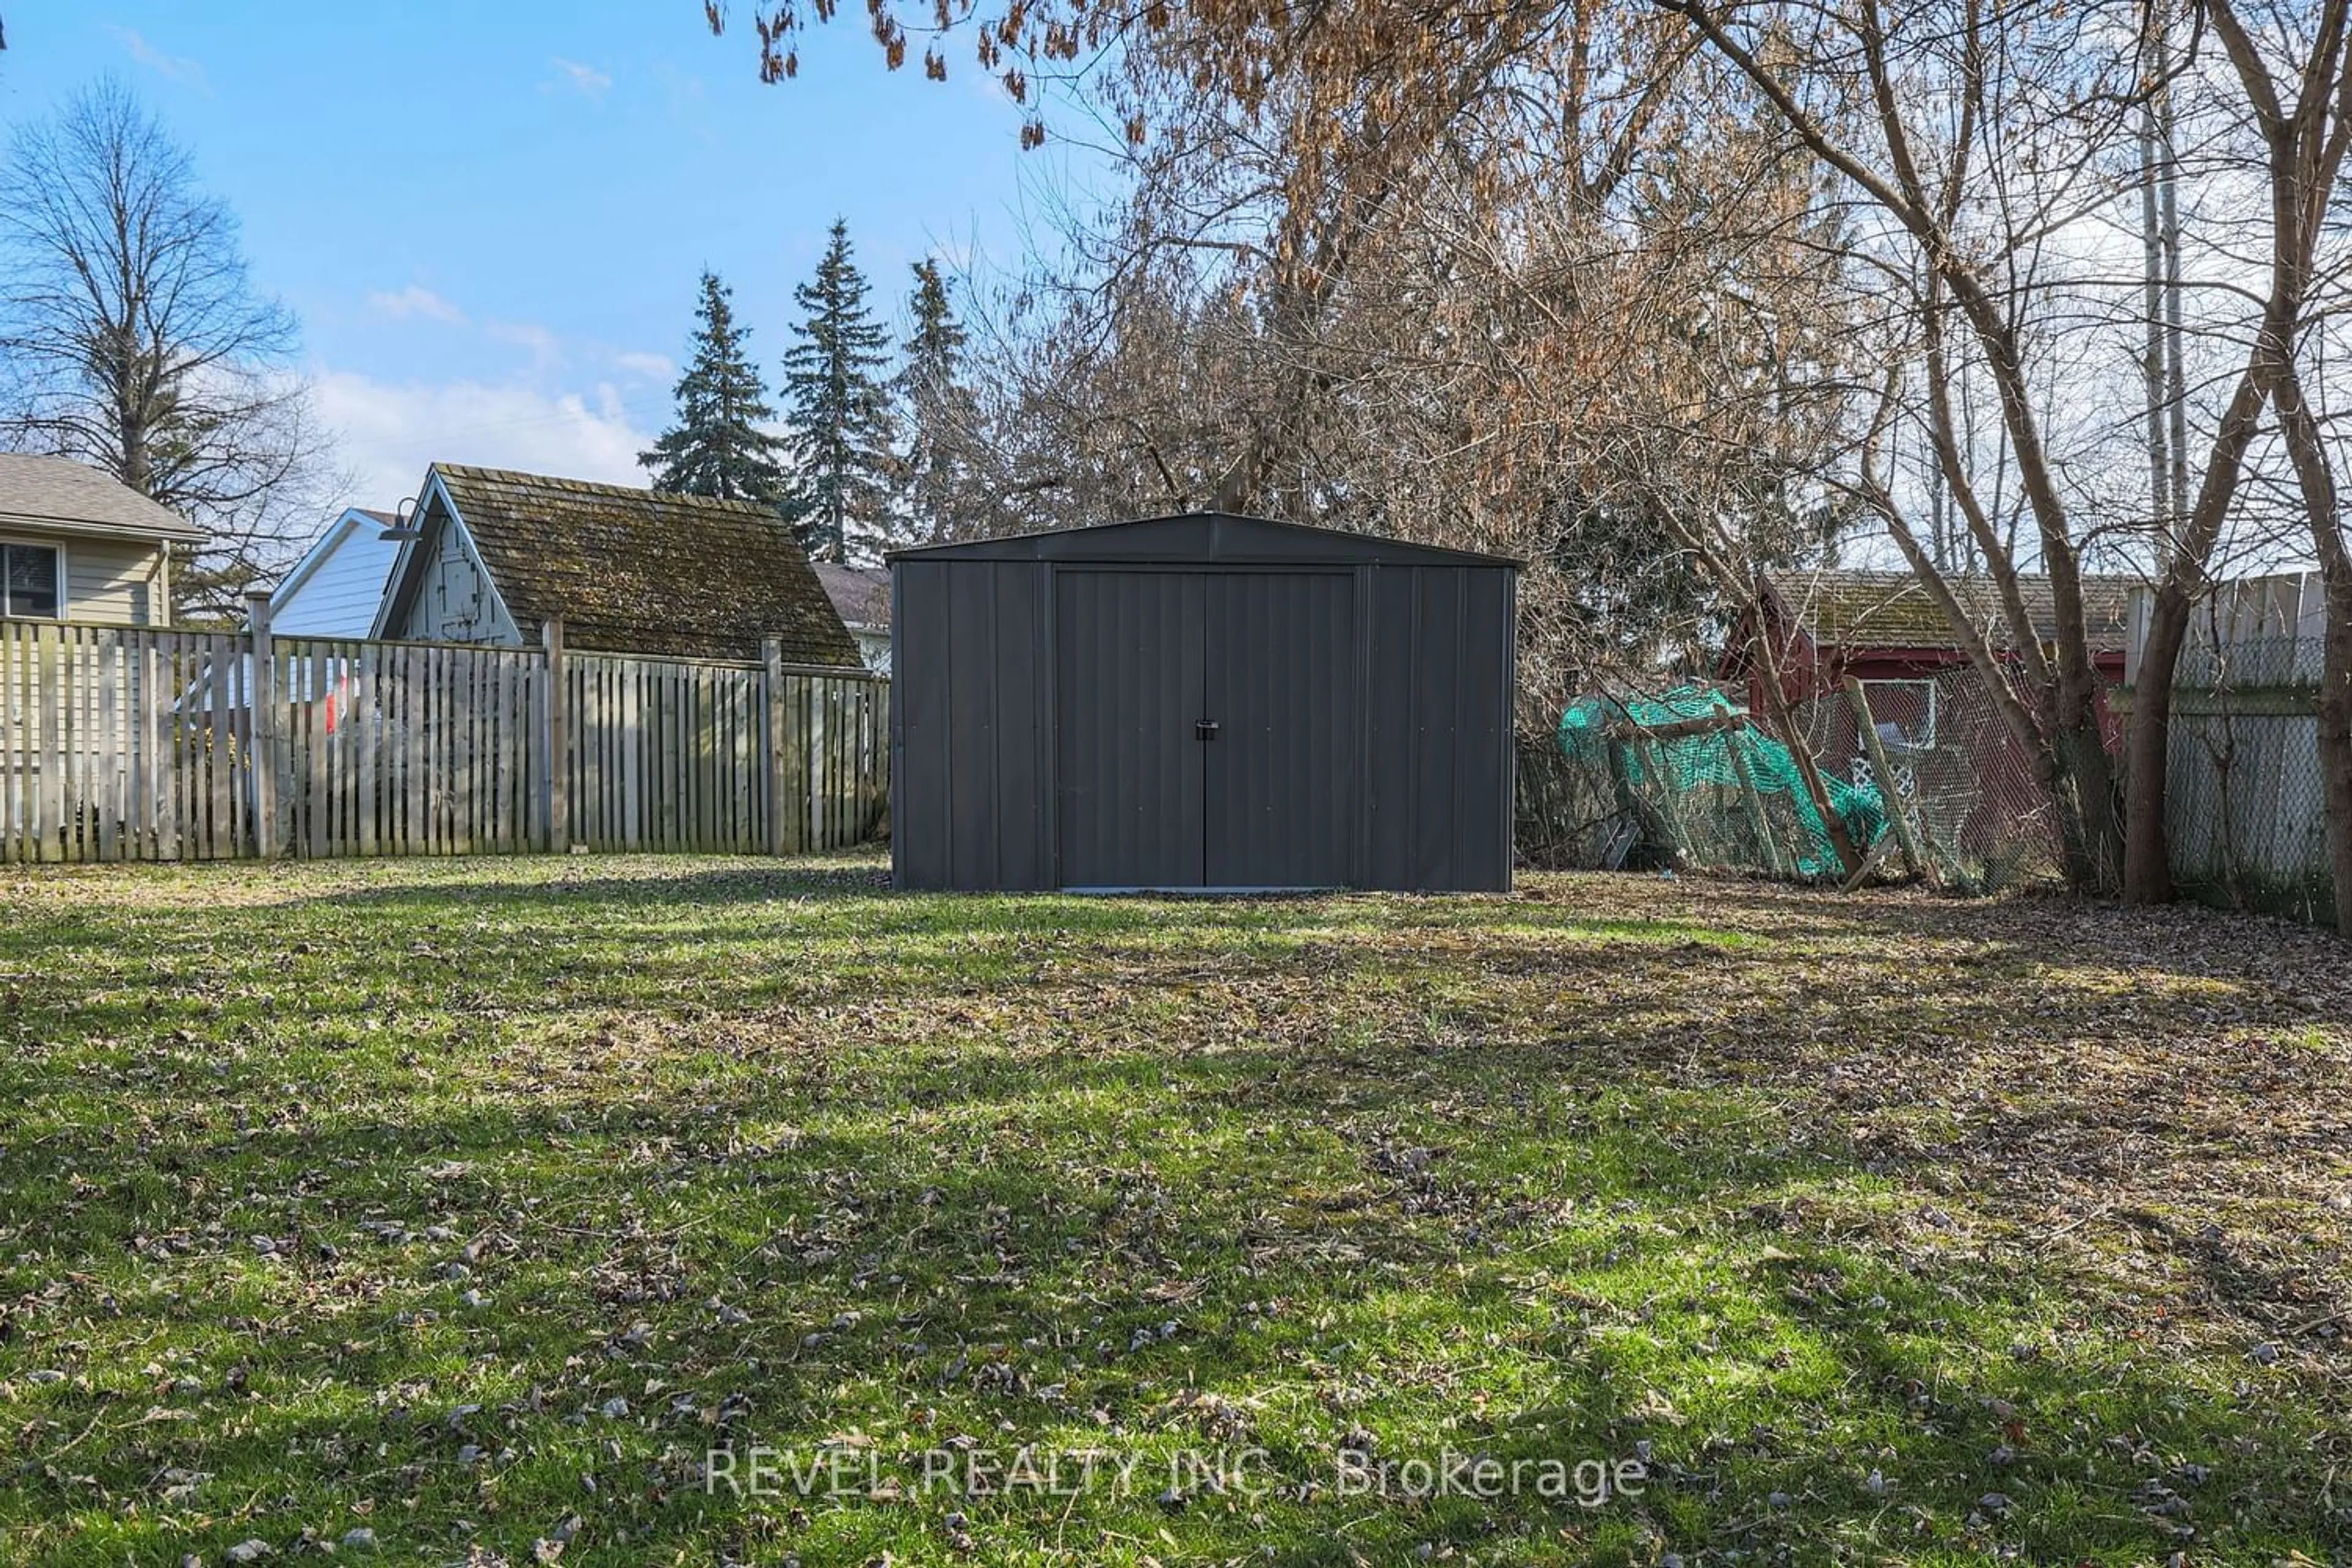 Shed for 6560 Harmony Ave, Niagara Falls Ontario L2H 1Z4